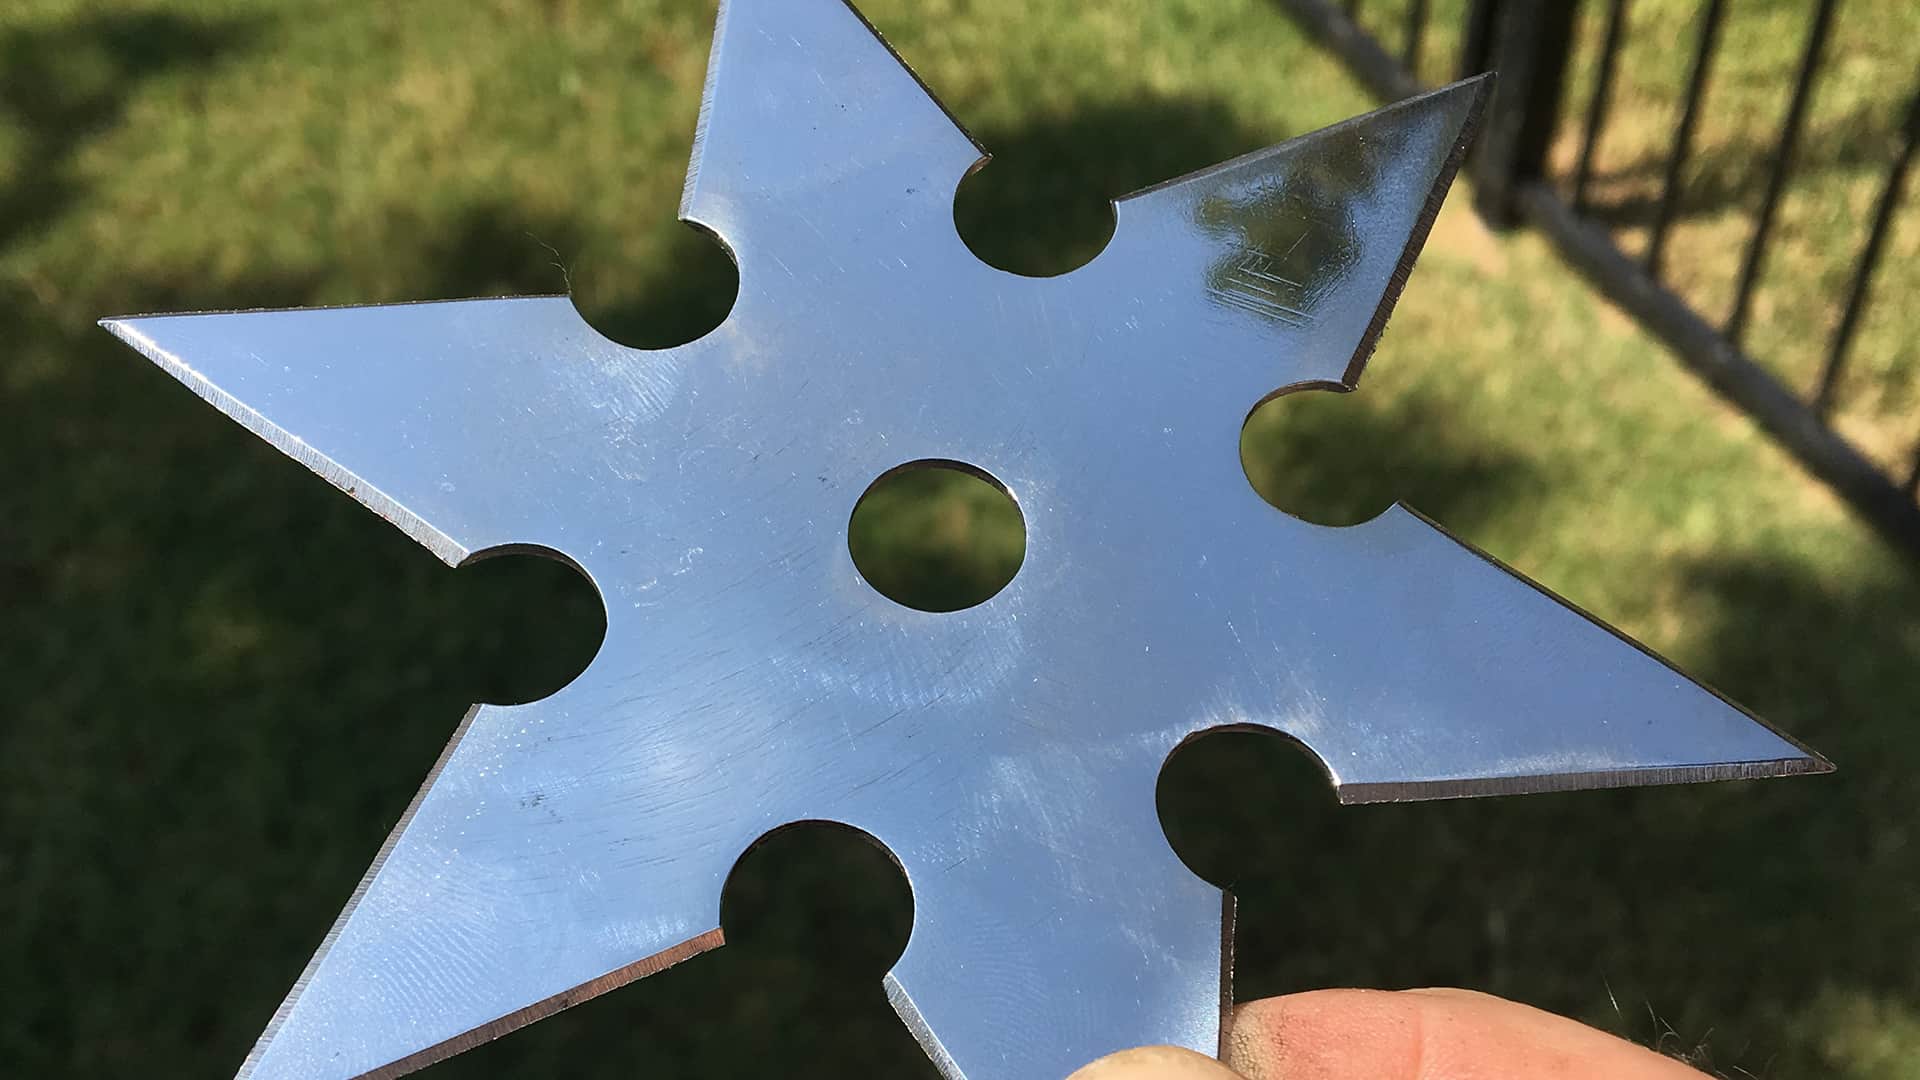 https://www.thegeekpub.com/wp-content/uploads/2015/09/Make-a-Throwing-Star-from-a-Saw-Blade-0020.jpg